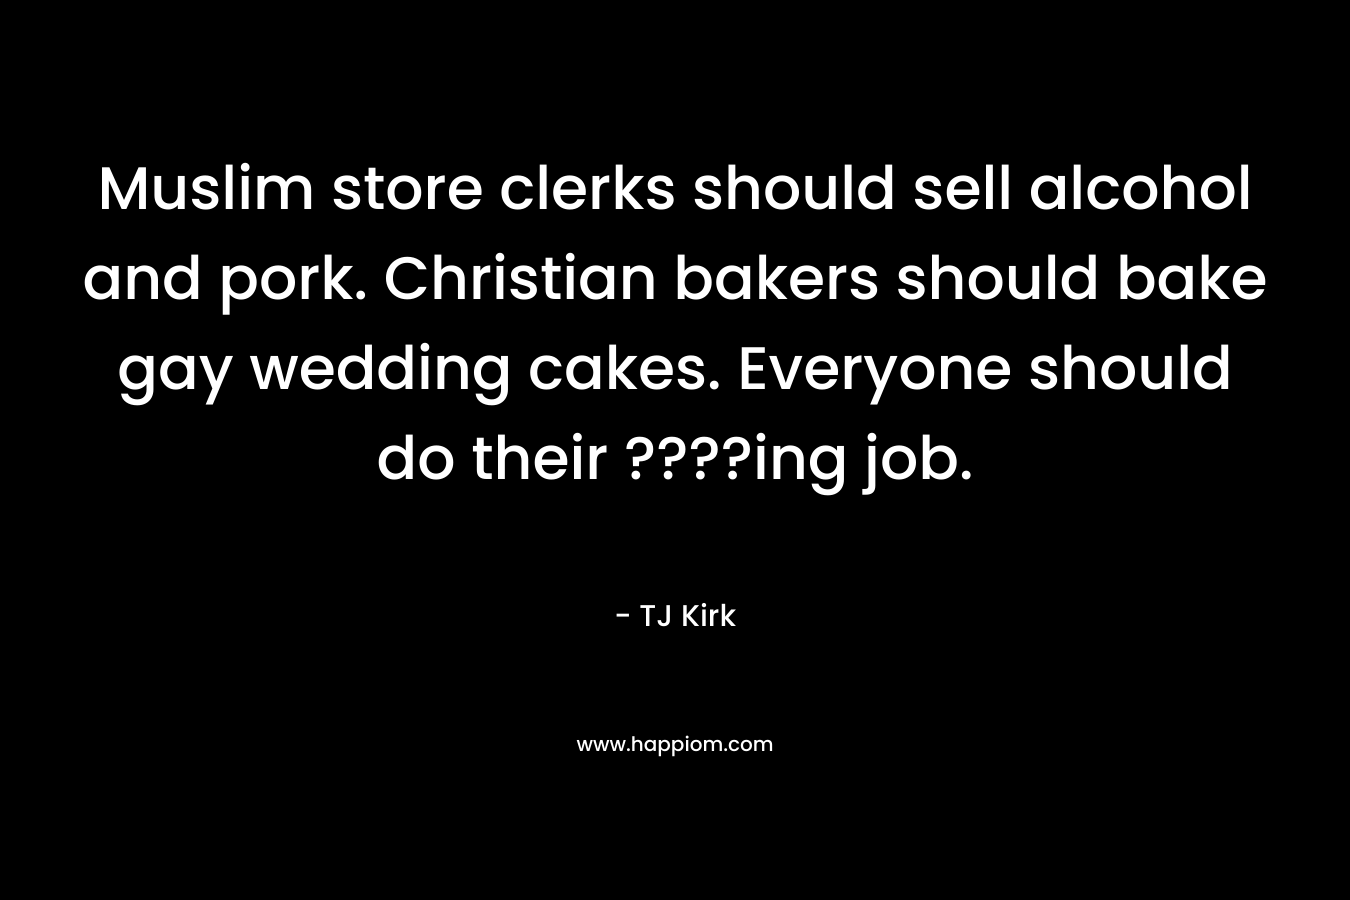 Muslim store clerks should sell alcohol and pork. Christian bakers should bake gay wedding cakes. Everyone should do their ????ing job.